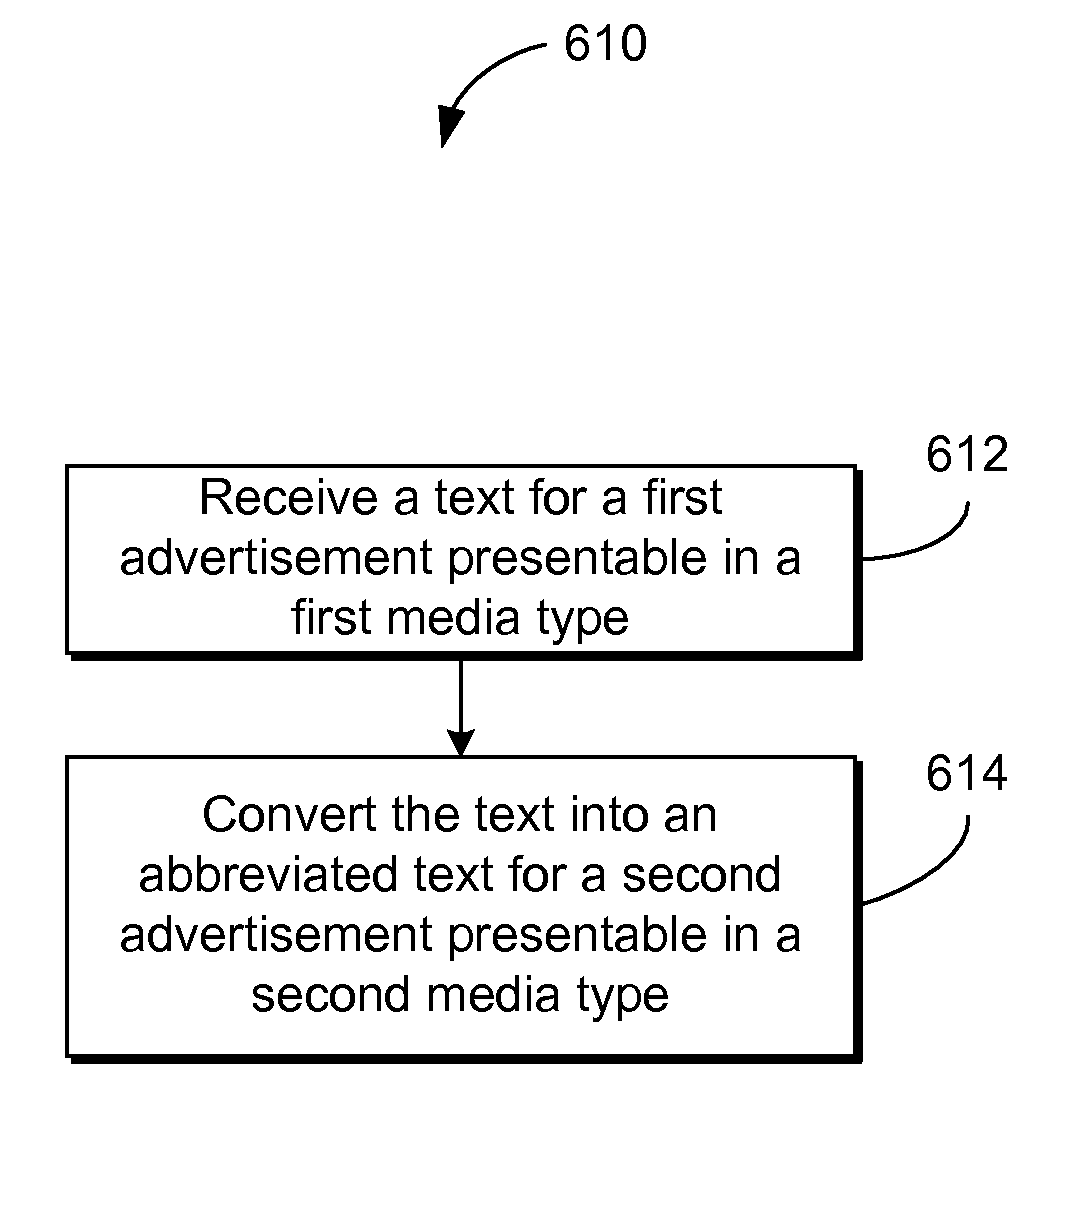 System and Method for Providing Advertisement